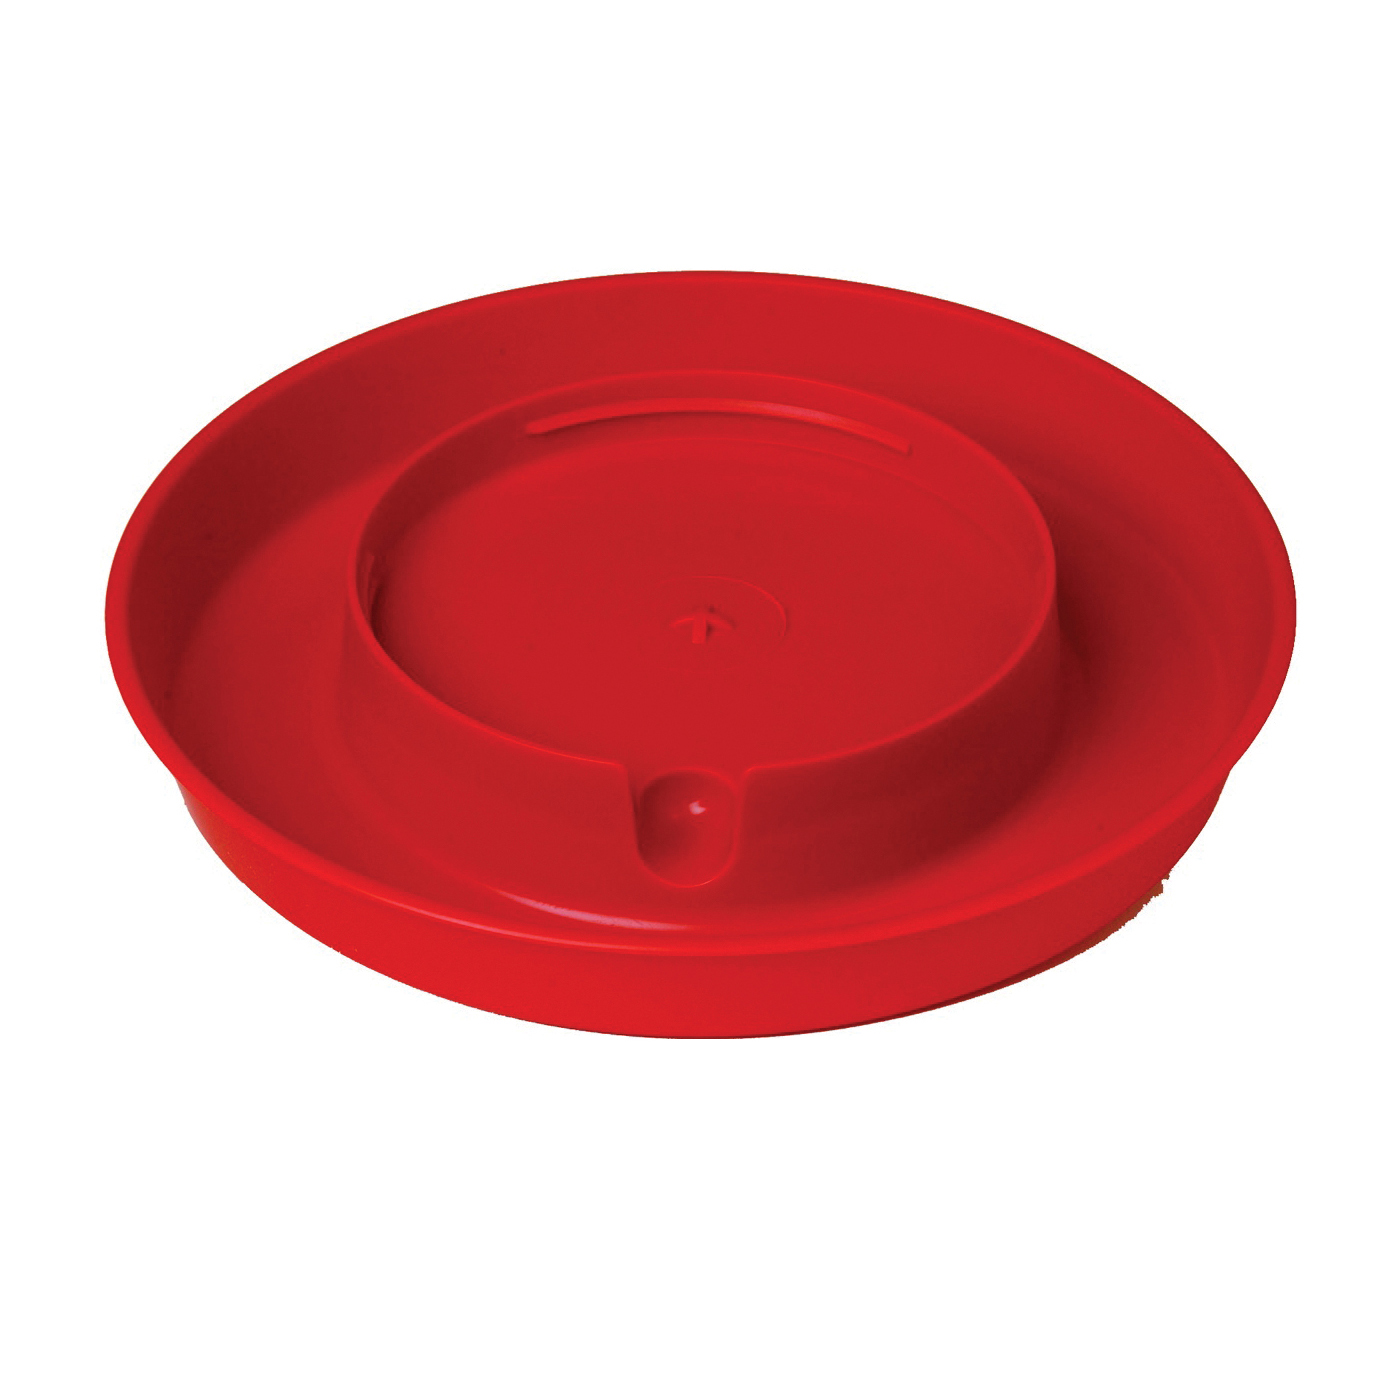 750 Poultry Waterer Base, 9 in Dia, 1-1/2 in H, 1 gal Capacity, Polystyrene, Red